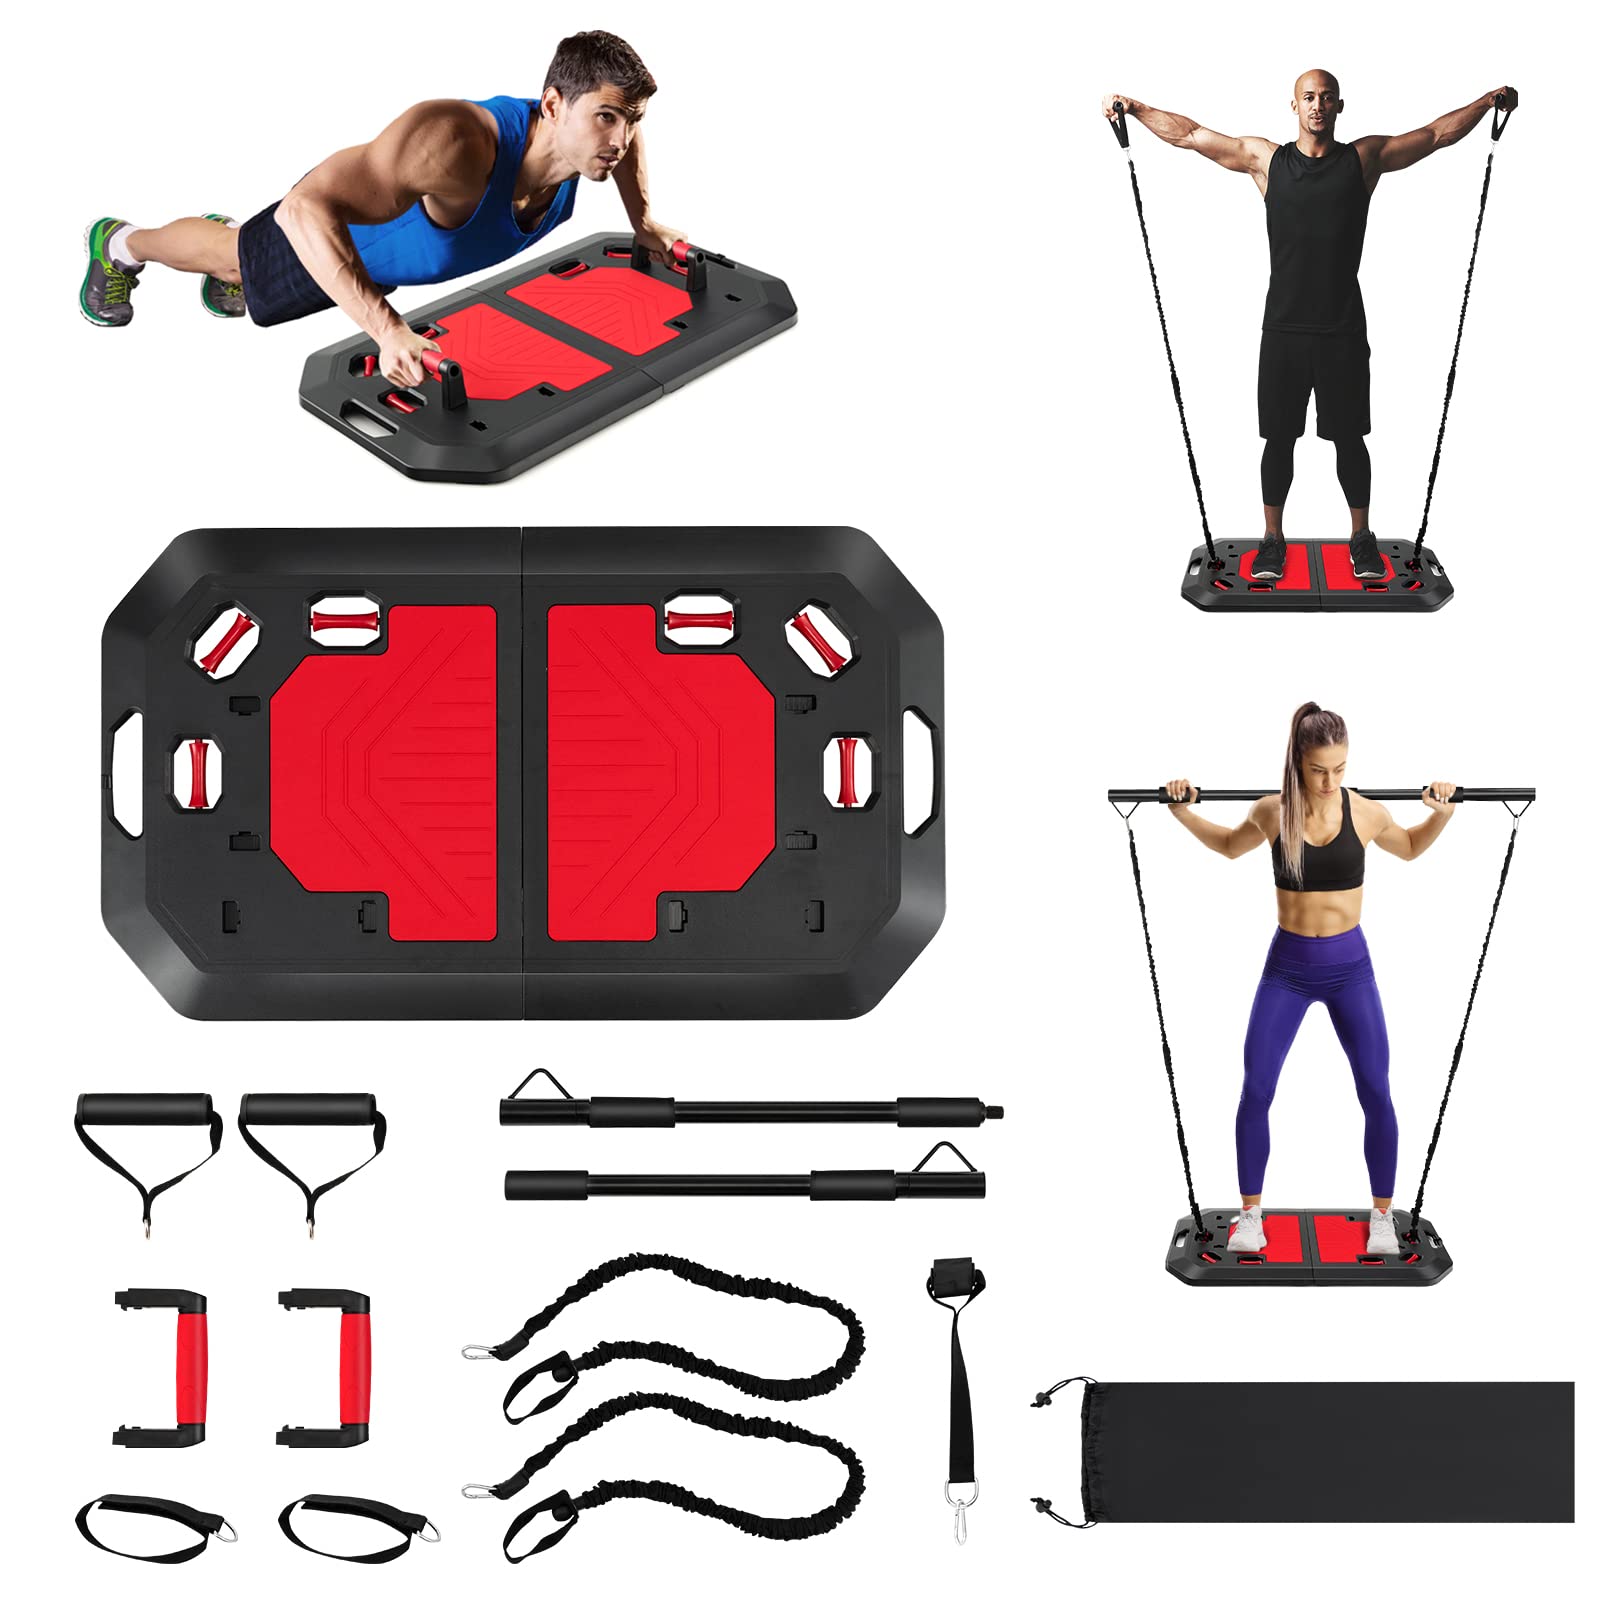 Goplus Portable Home Gym Workout Equipment w/ 8 Exercise Accessories